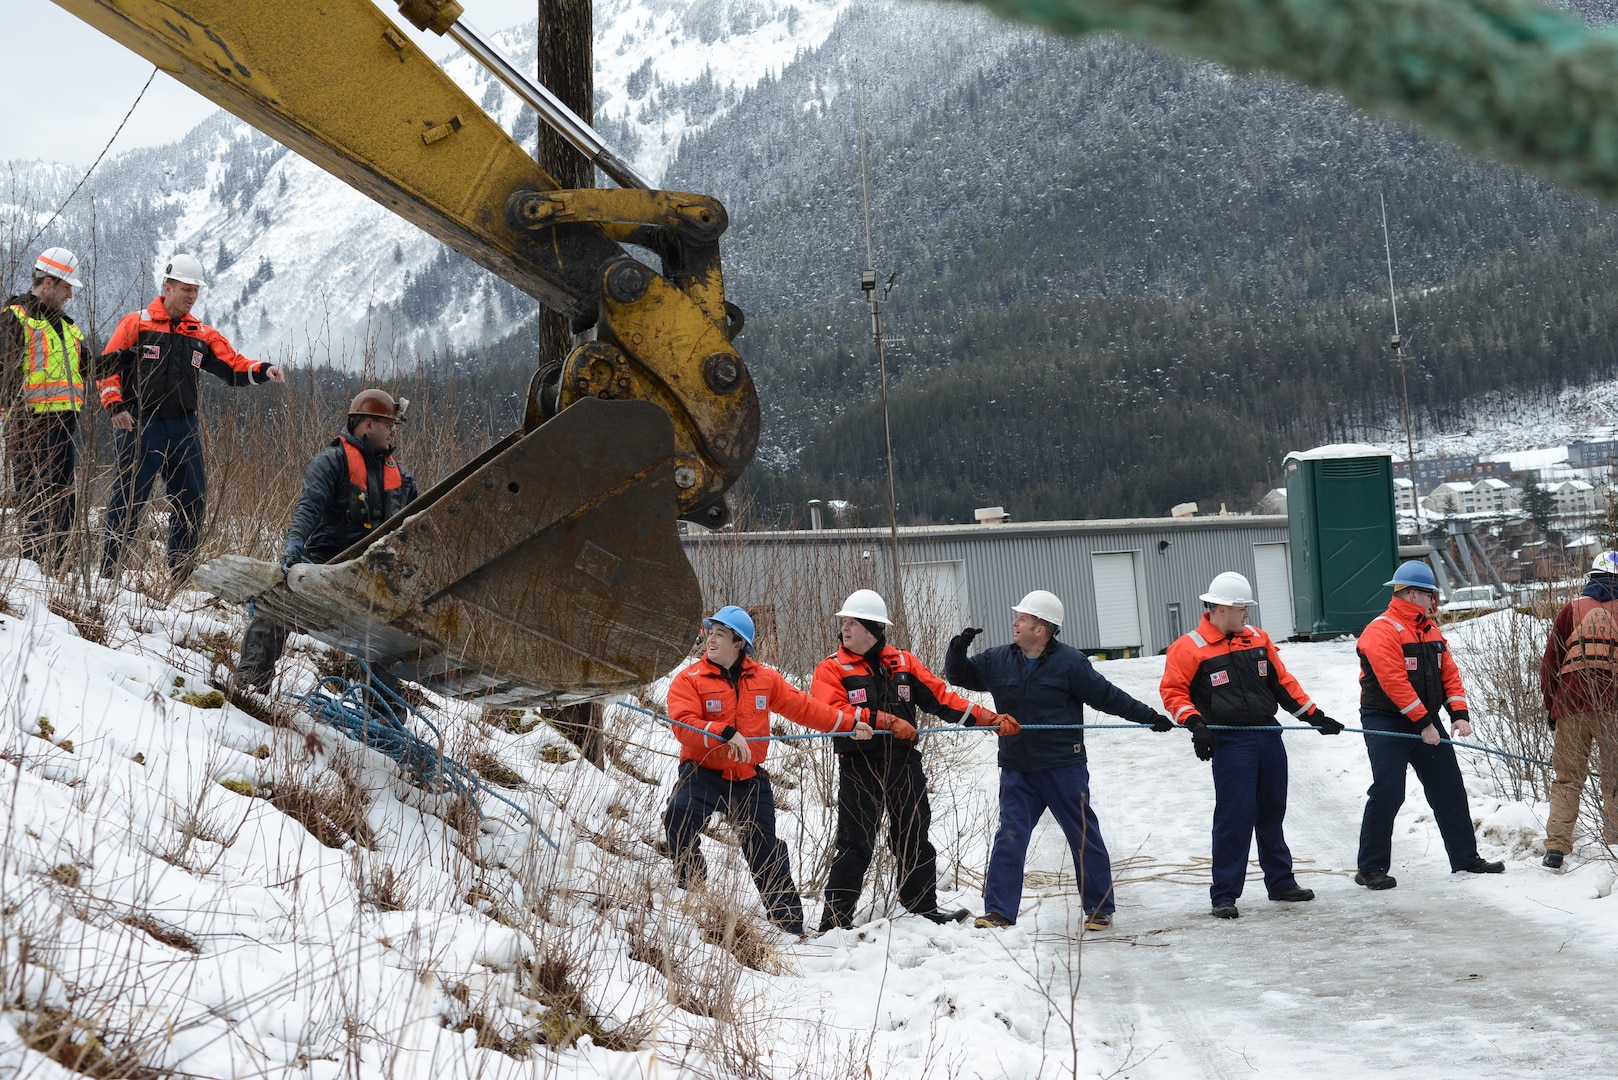 Coast Guard Sector Juneau servicemembers and contractors pull a line attached to a cable at the bow of the sunken vessel Tagish in Gastineau Channel, Juneau, Alaska, Feb. 9, 2023.